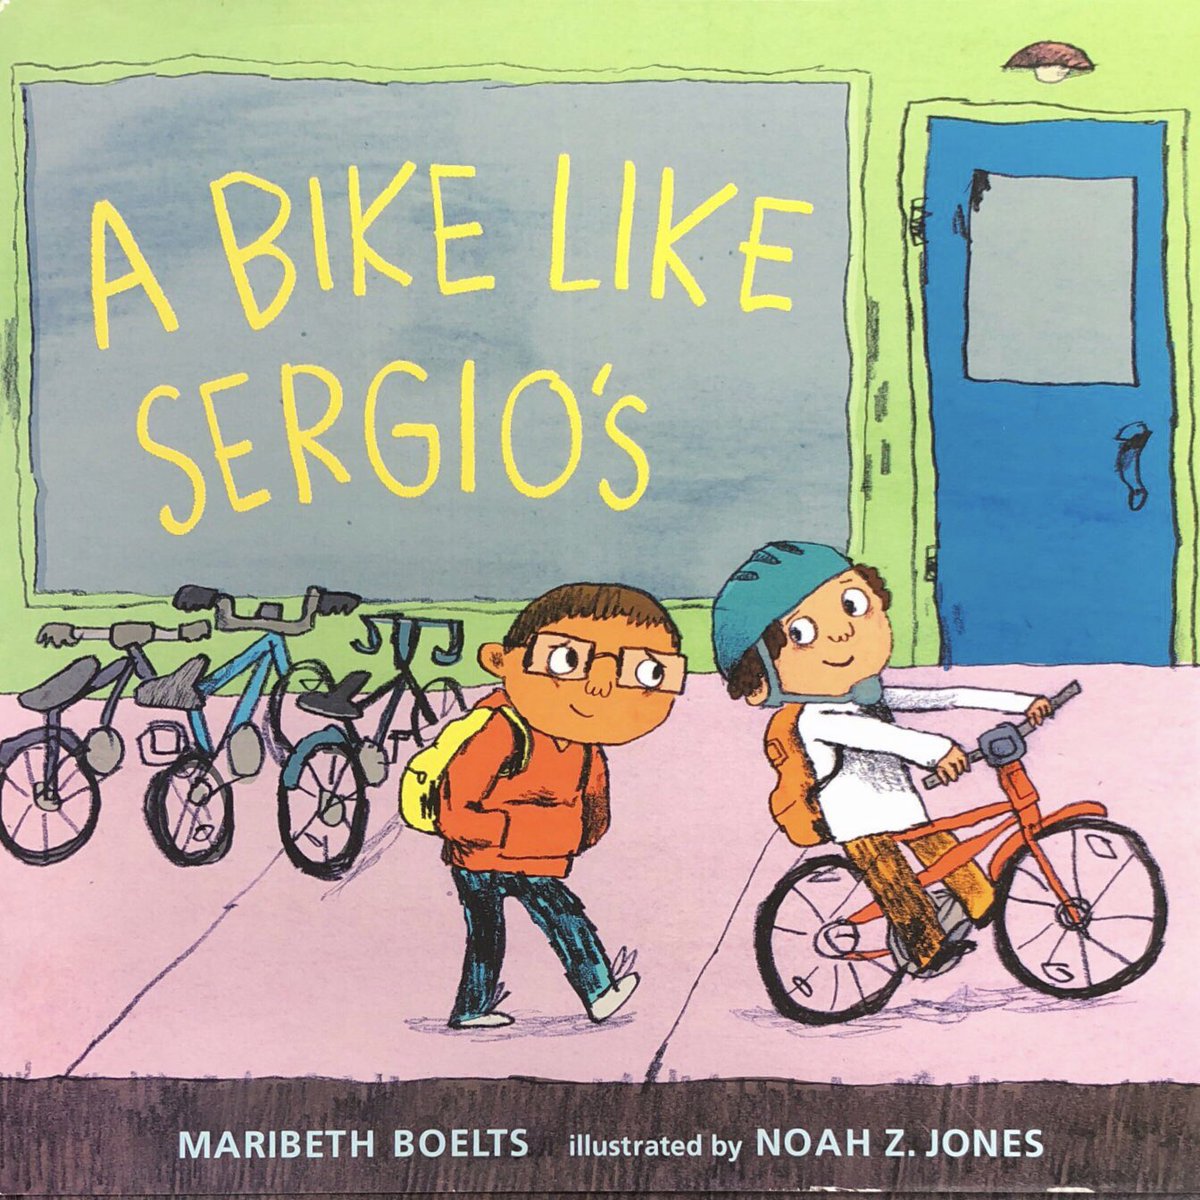 Engagement made easy-an awesome book and kids that love stories. @maribethboelts #classroombookaday